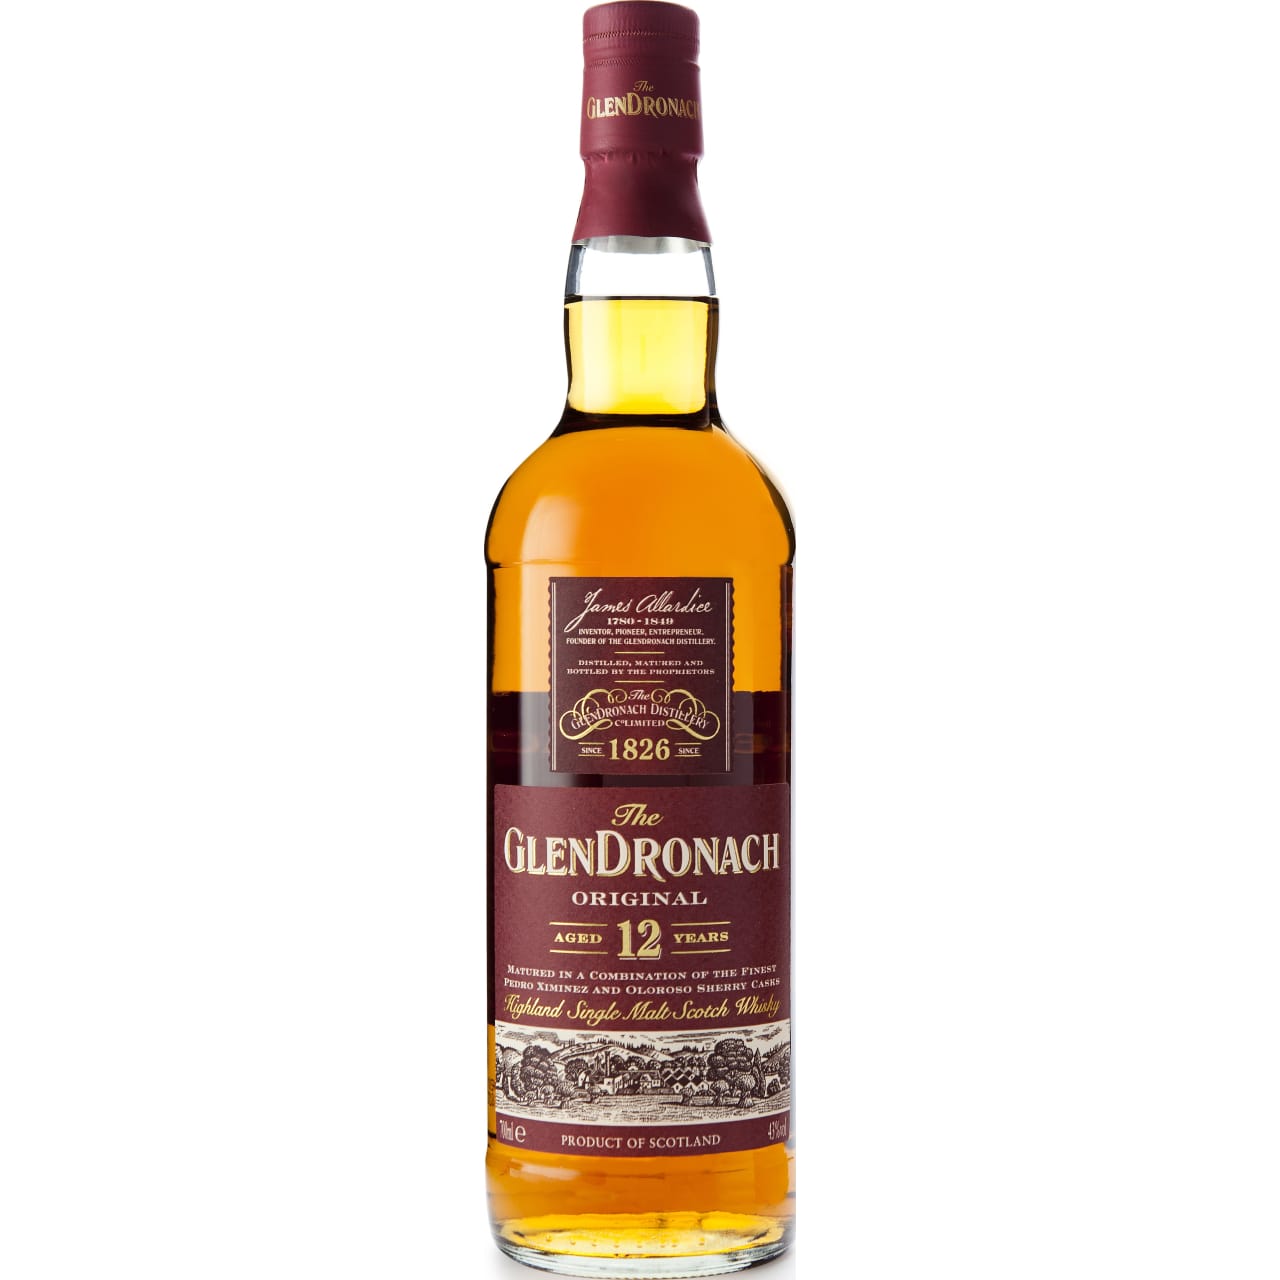 This superb richly sherried single malt is matured for at least 12 years in a combination of the finest Spanish Pedro Ximenez and Oloroso sherry casks. The Glendronach 12 year old Original is a sweet, creamy dram bottled at 43% ABV and natural in colour.